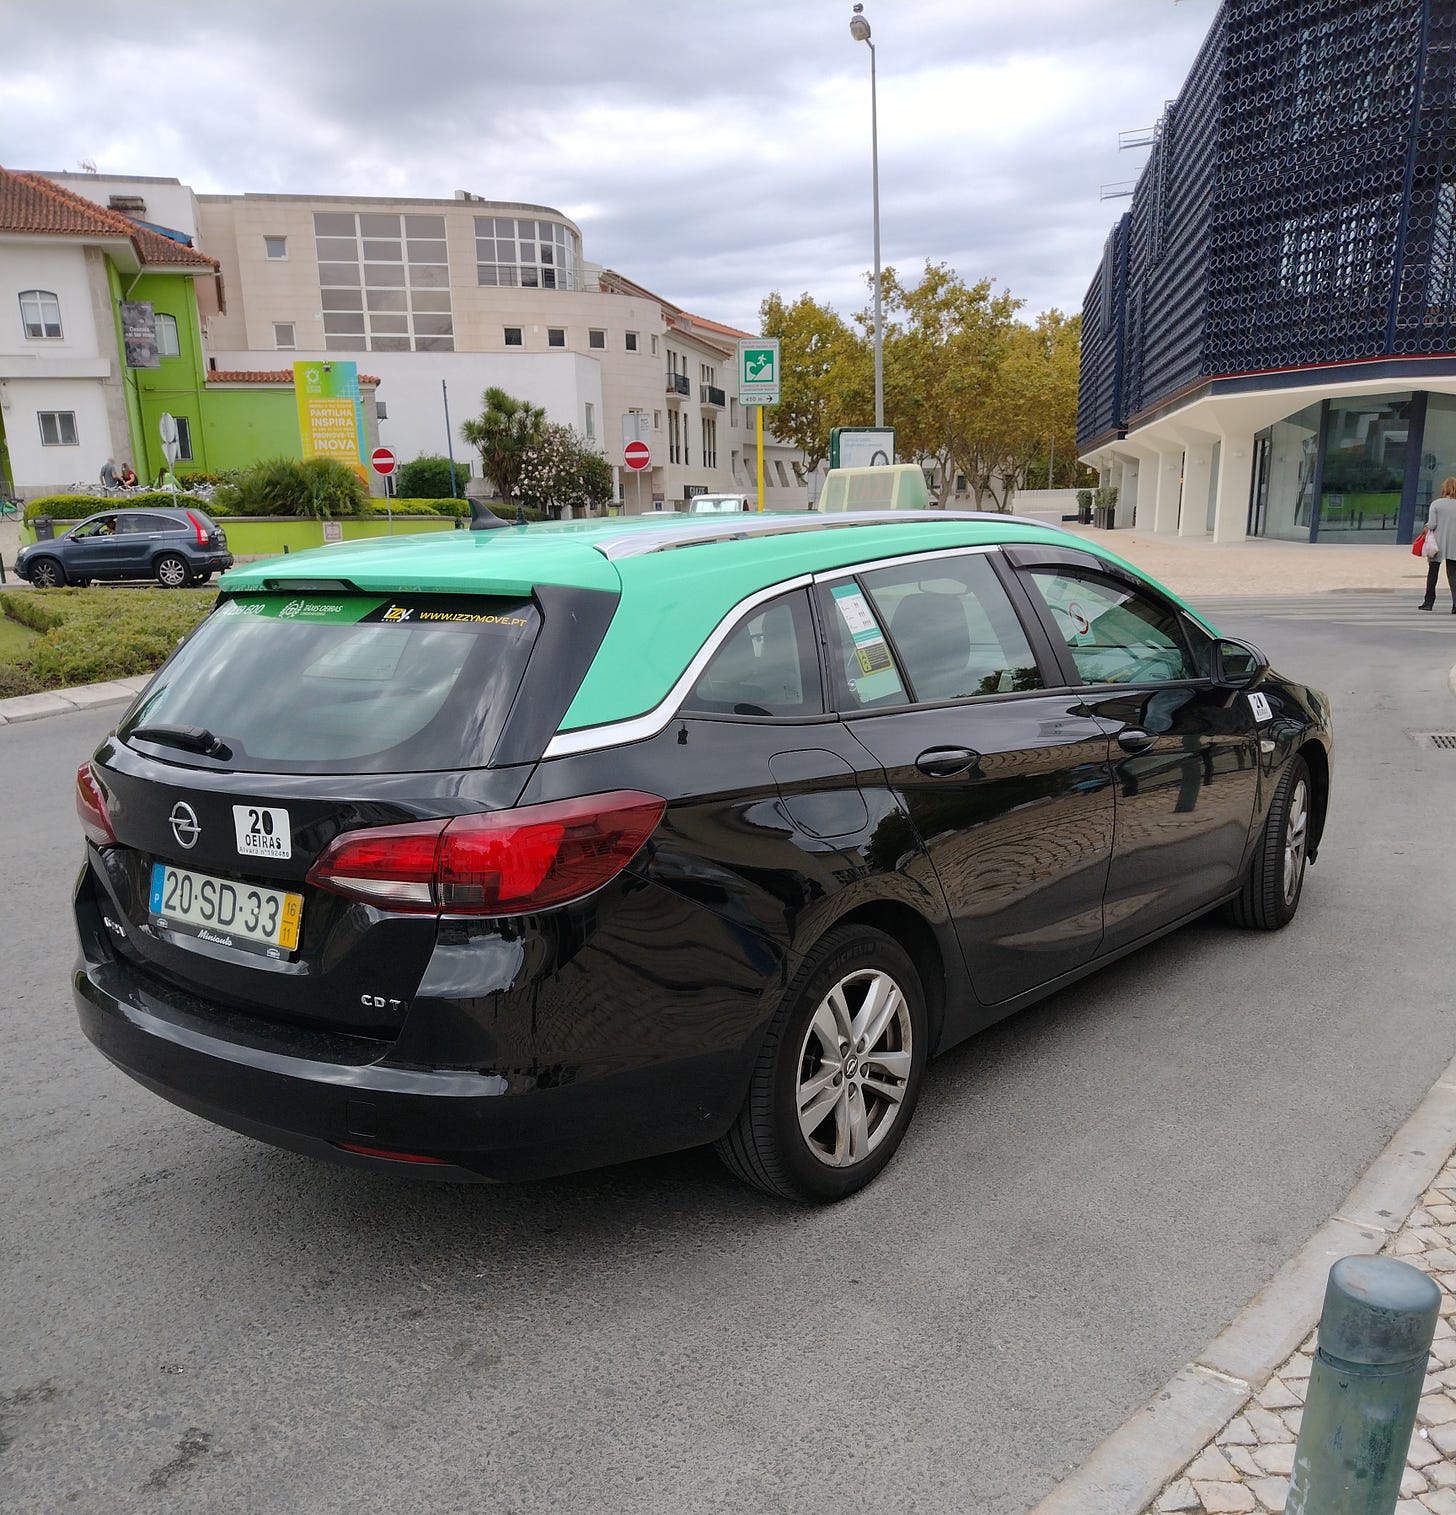 TAXI IN PORTUGAL